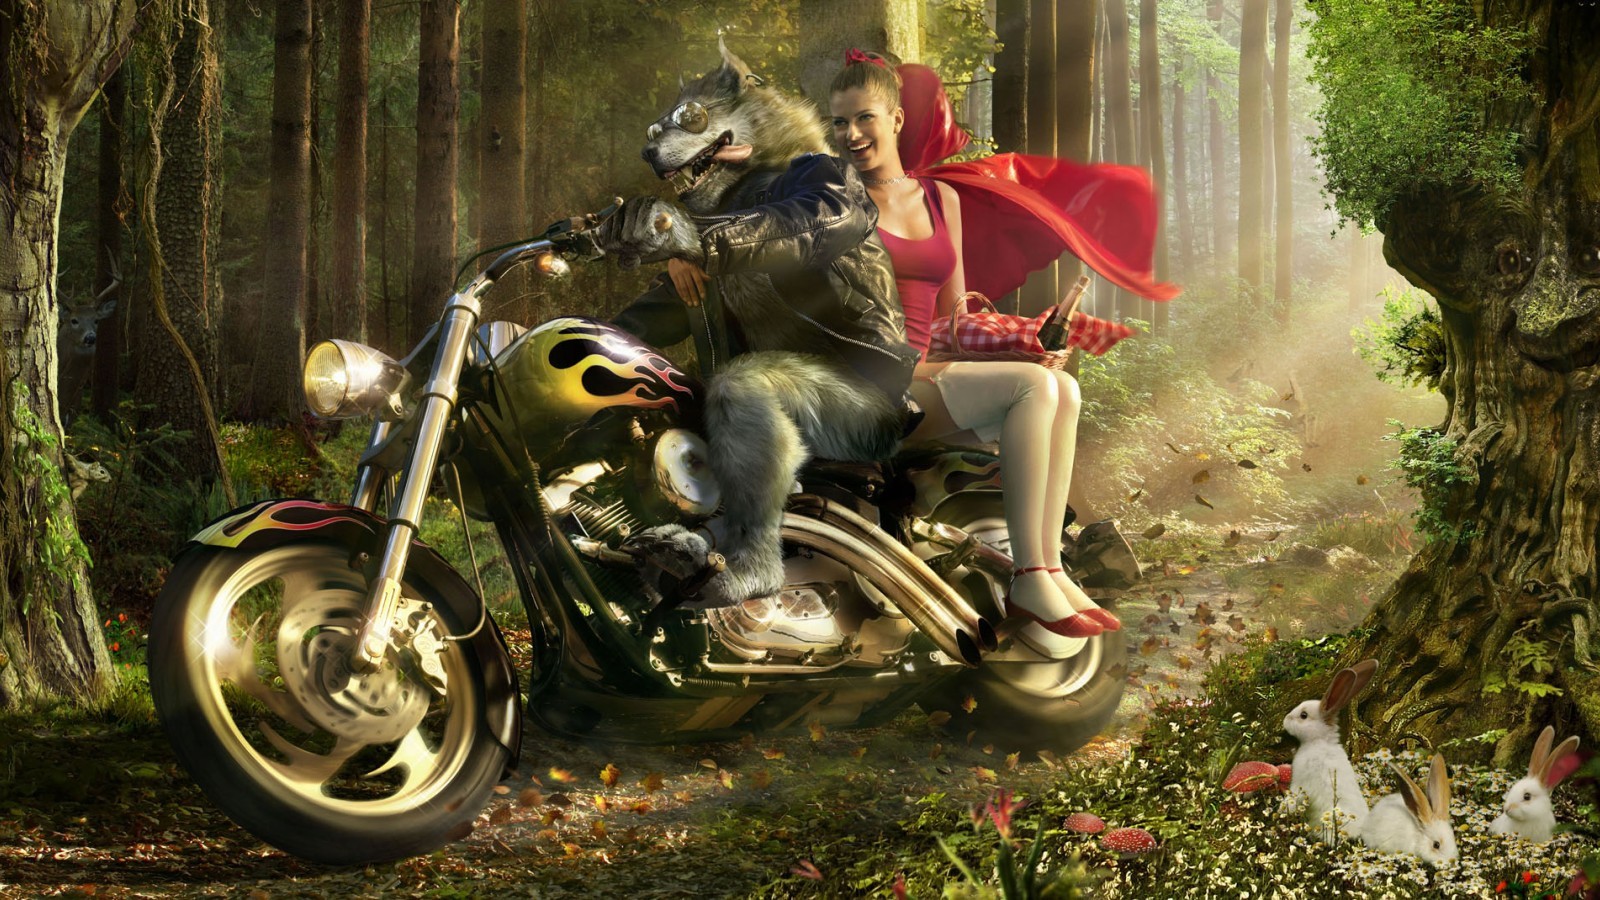 General 1600x900 Little Red Riding Hood wolf motorcycle creature vehicle cape stockings white stockings fantasy art fantasy girl sitting tongue out humor women model women with motorcycles rabbits animals forest trees mammals Anthro